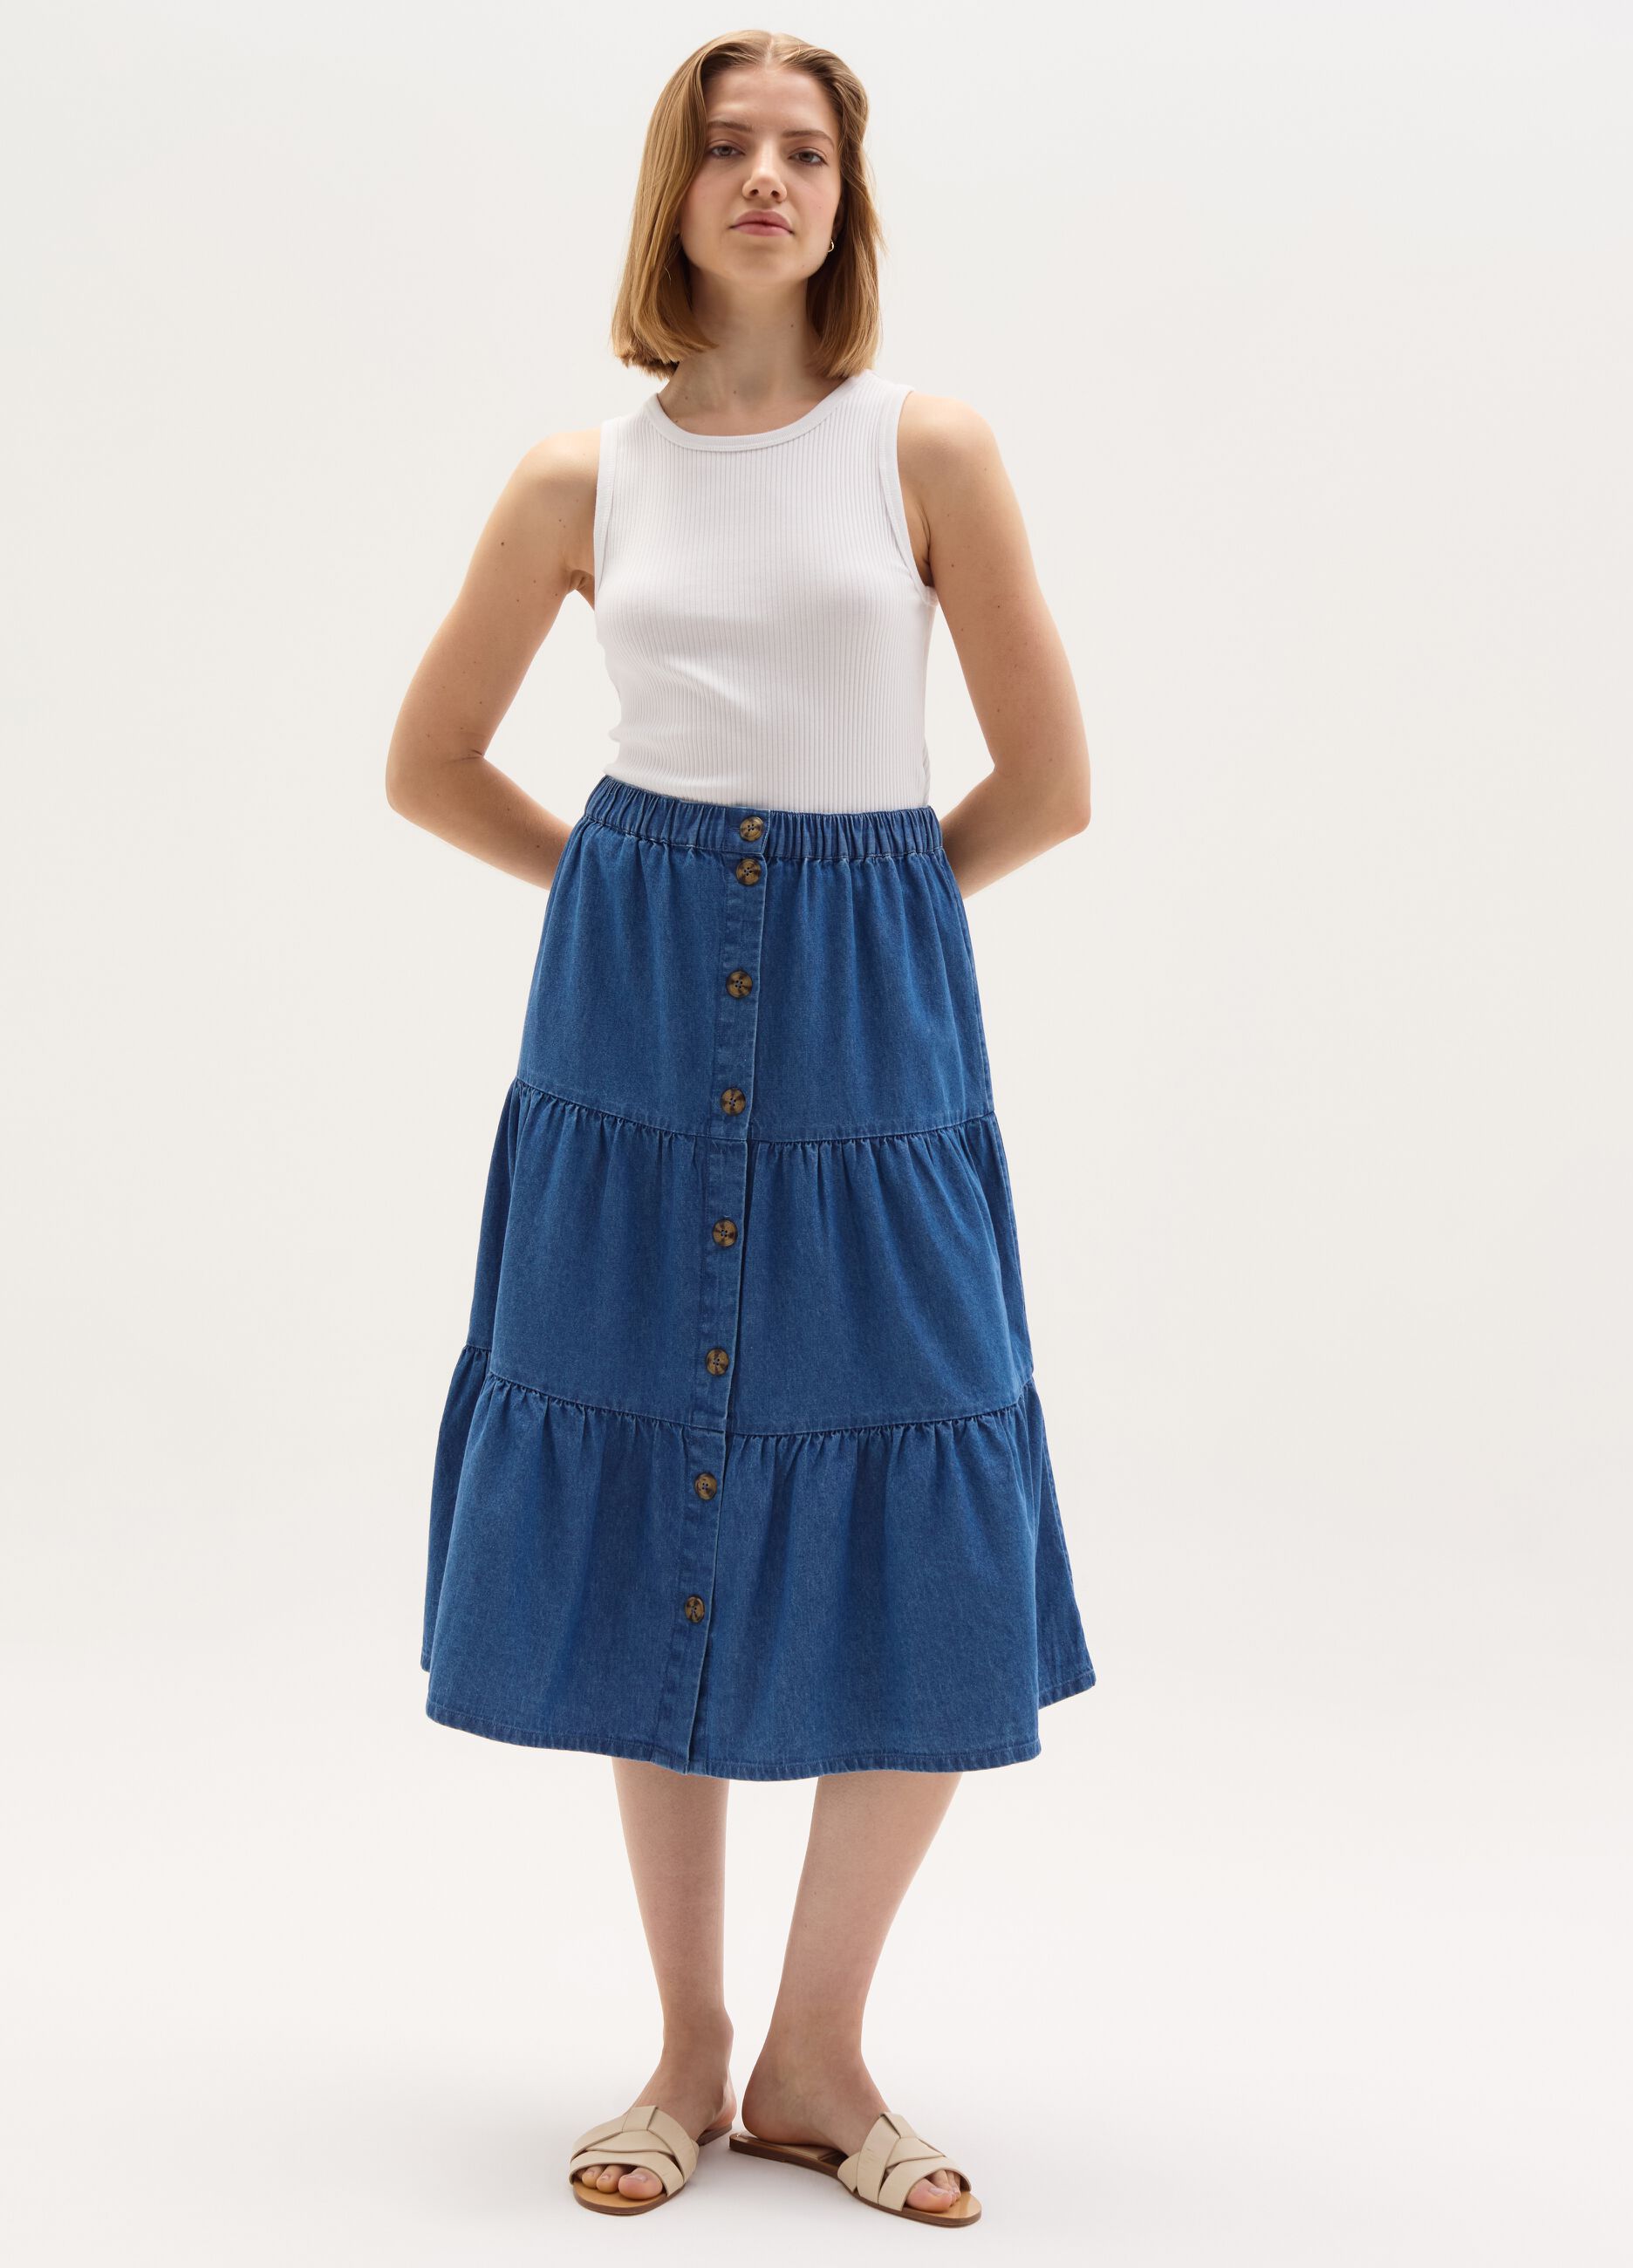 Tiered midi skirt in denim with buttons